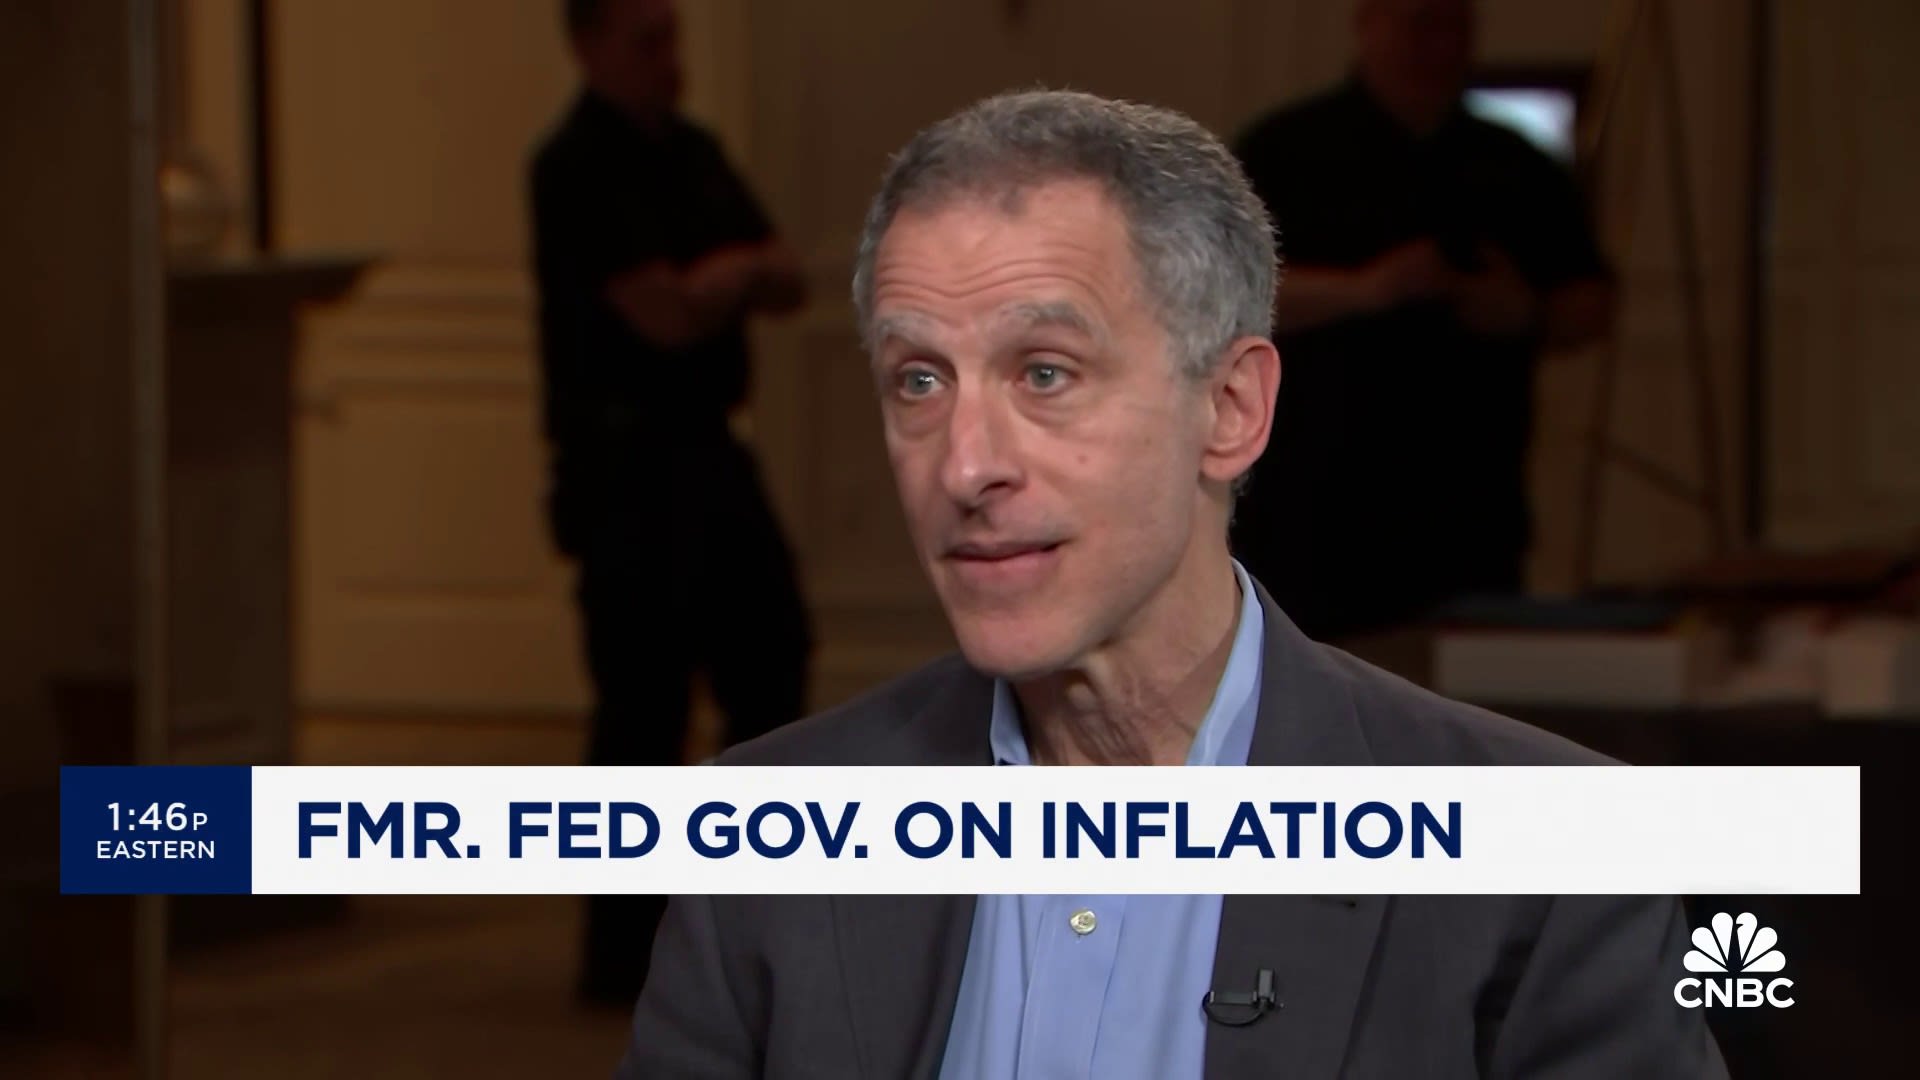 Former Fed governor Jeremy Stein: The Fed's 2% inflation target 'may be challenging'